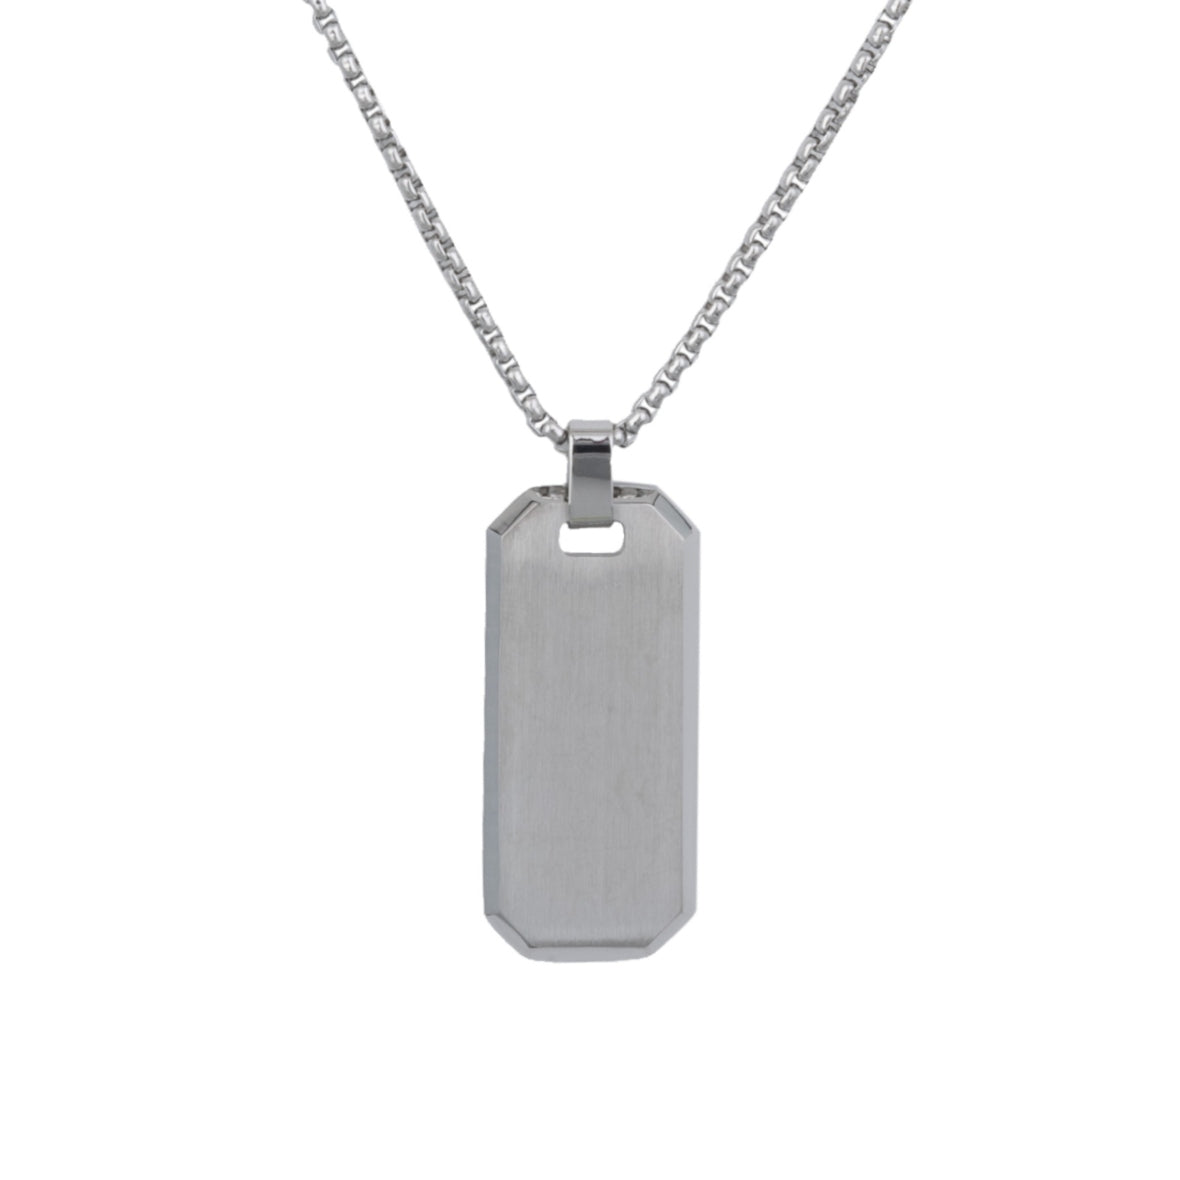 Silver Classic Dog Tag Necklace